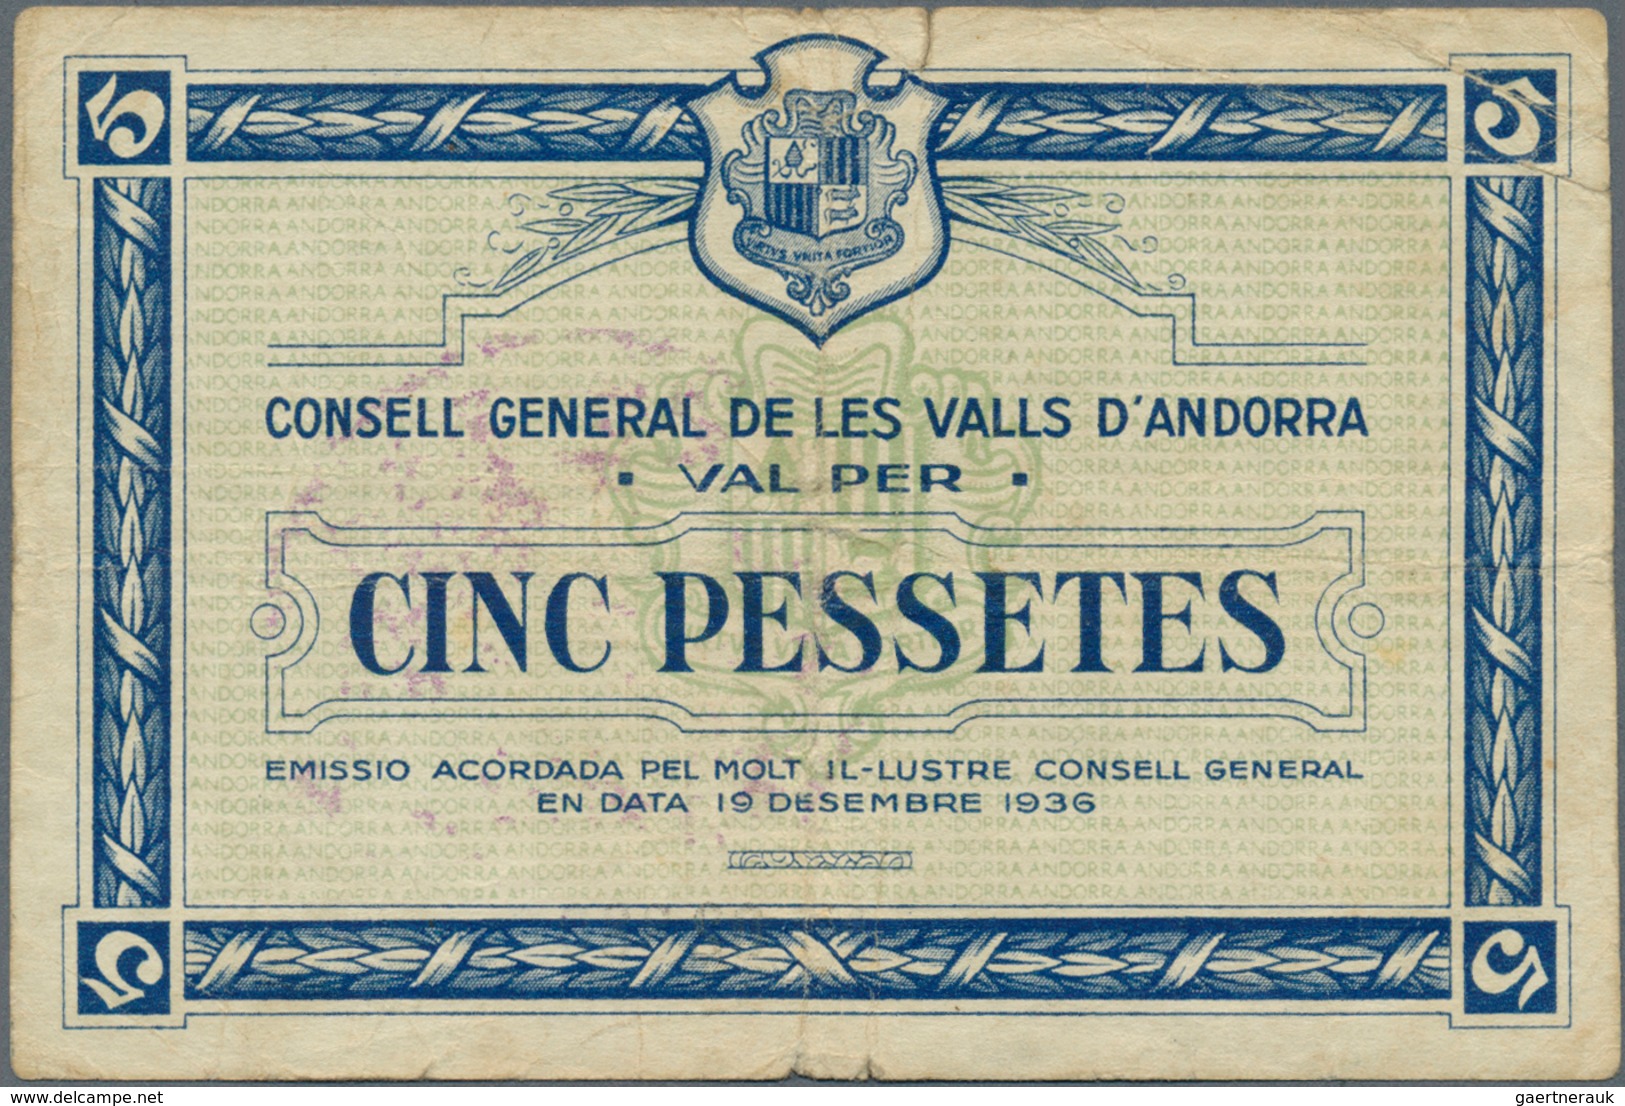 01015 Andorra: Rare Note Of 5 Pessetes 1936 P. 6, Used With Folds And Creases, Stronger Center Fold, But N - Andorra